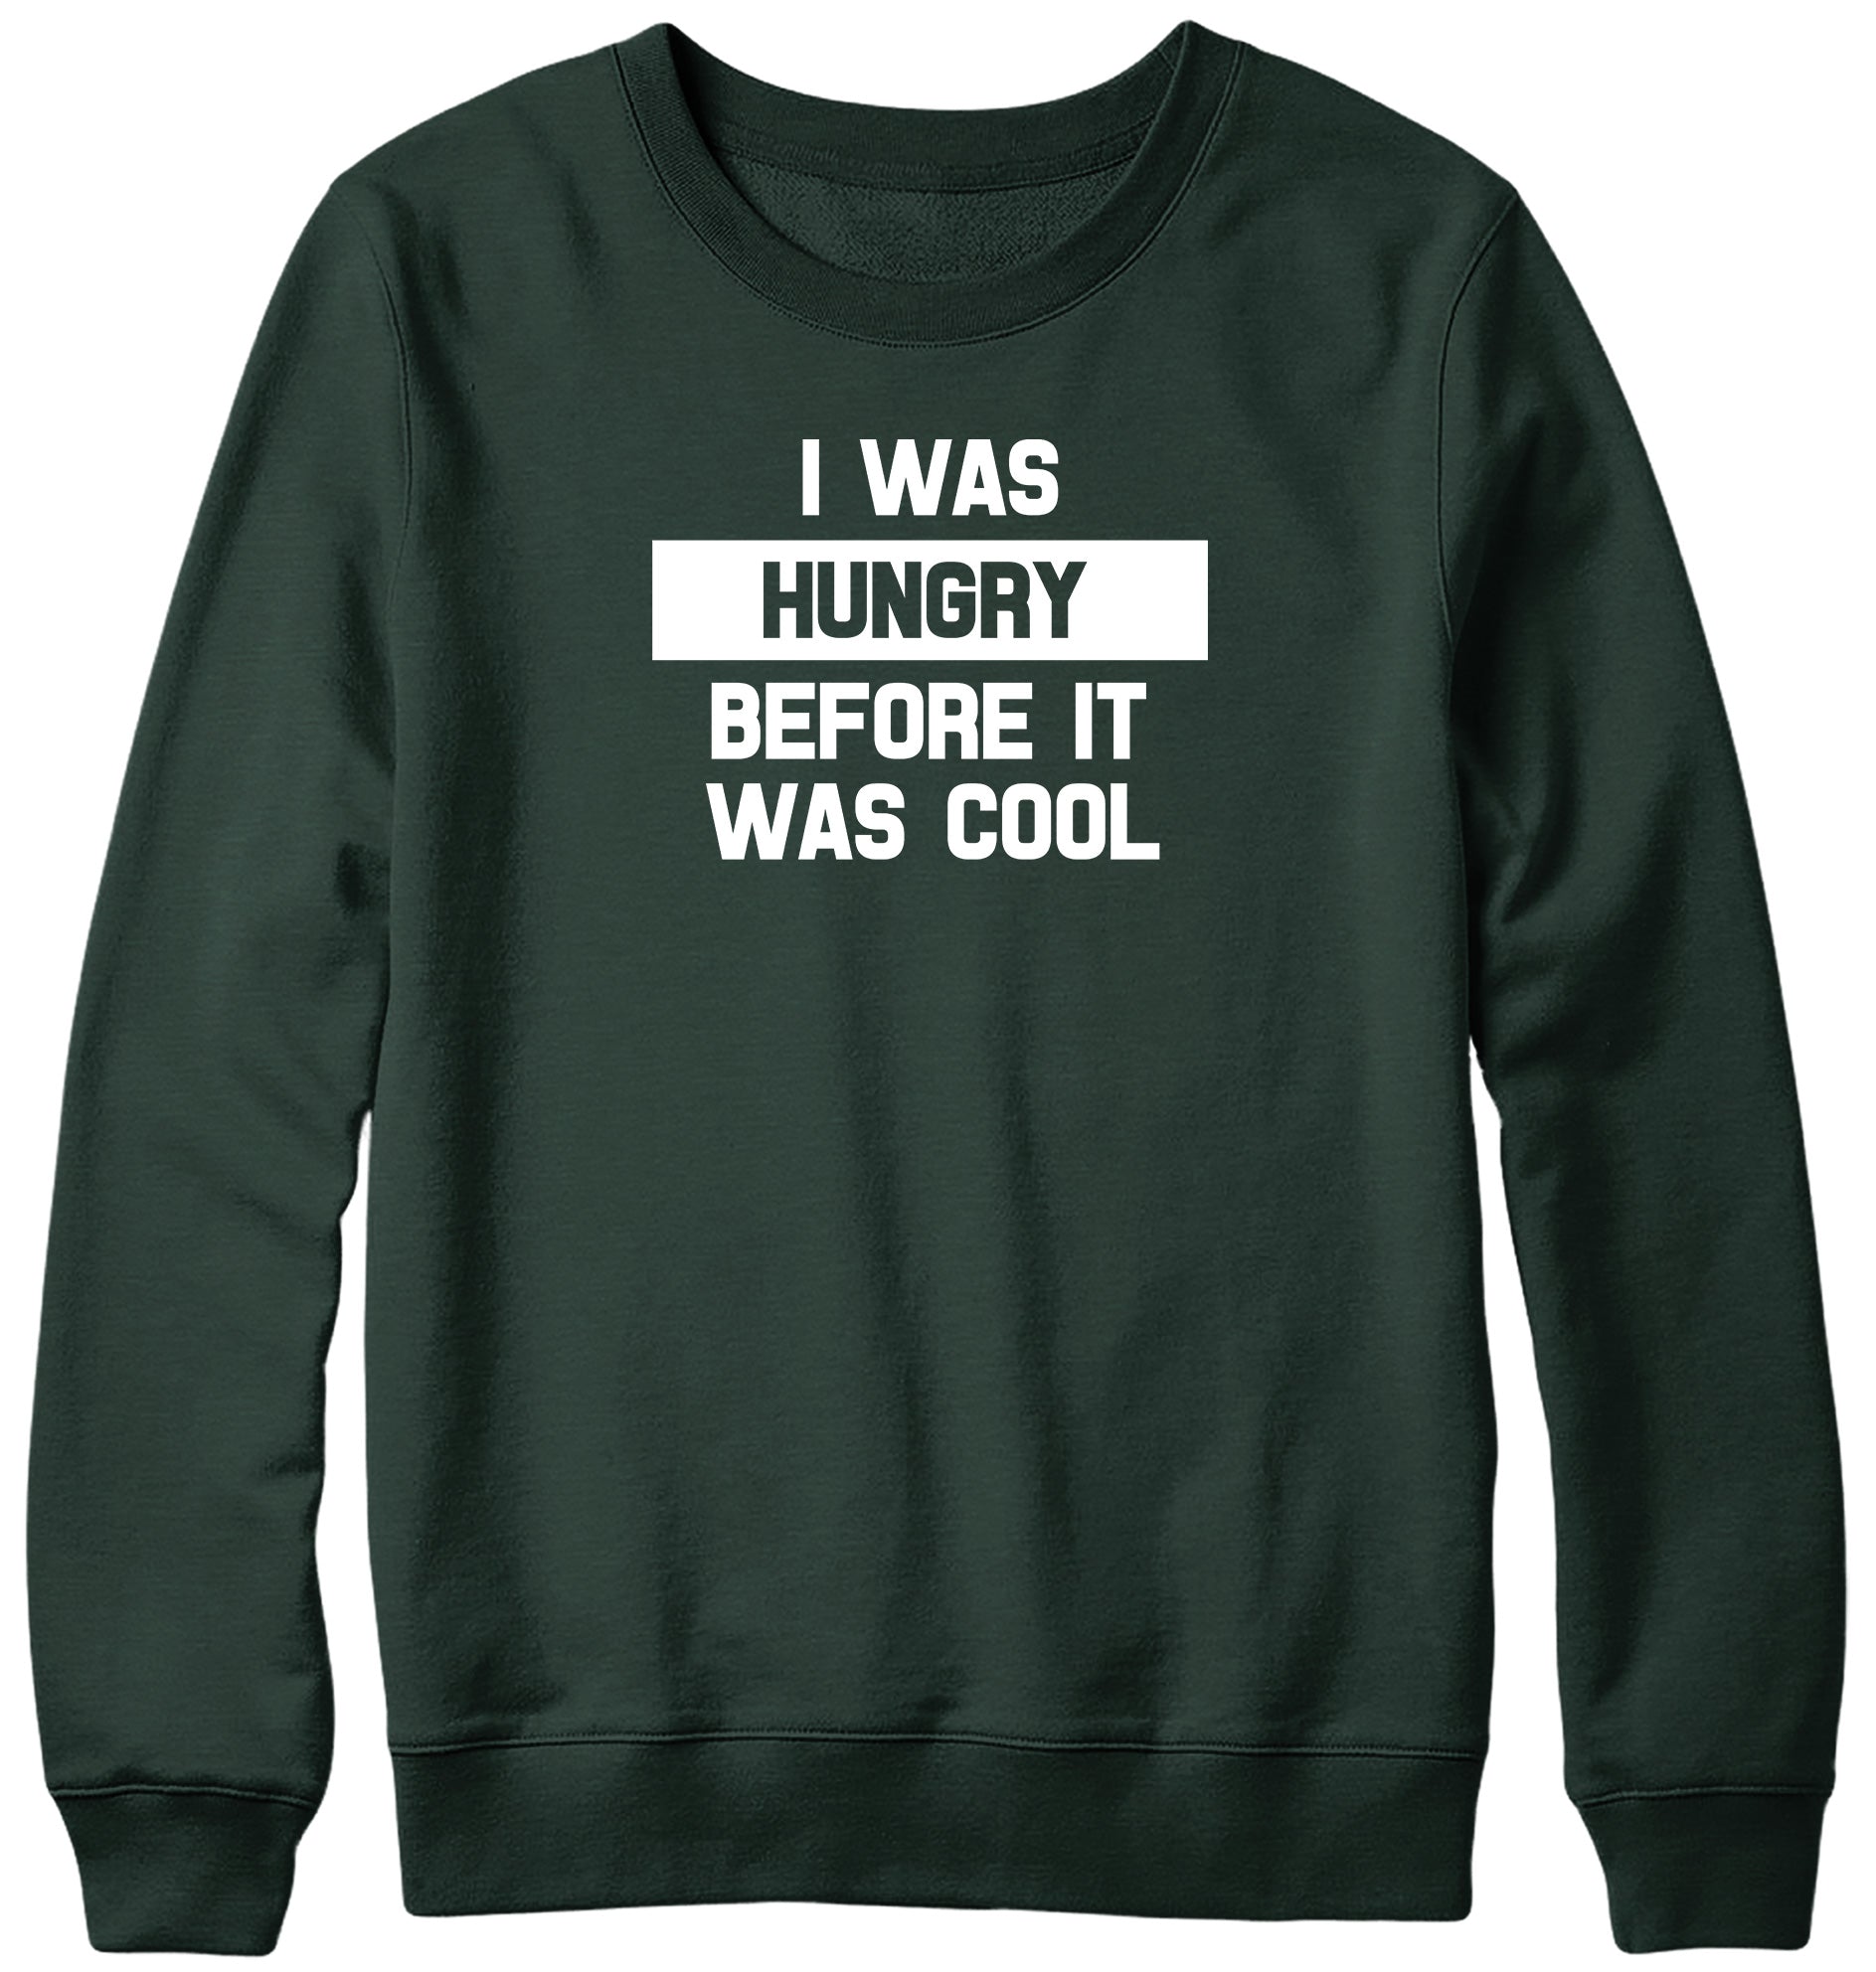 I WAS HUNGRY BEFORE IT WAS COOL WOMENS LADIES MENS UNISEX SWEATSHIRT